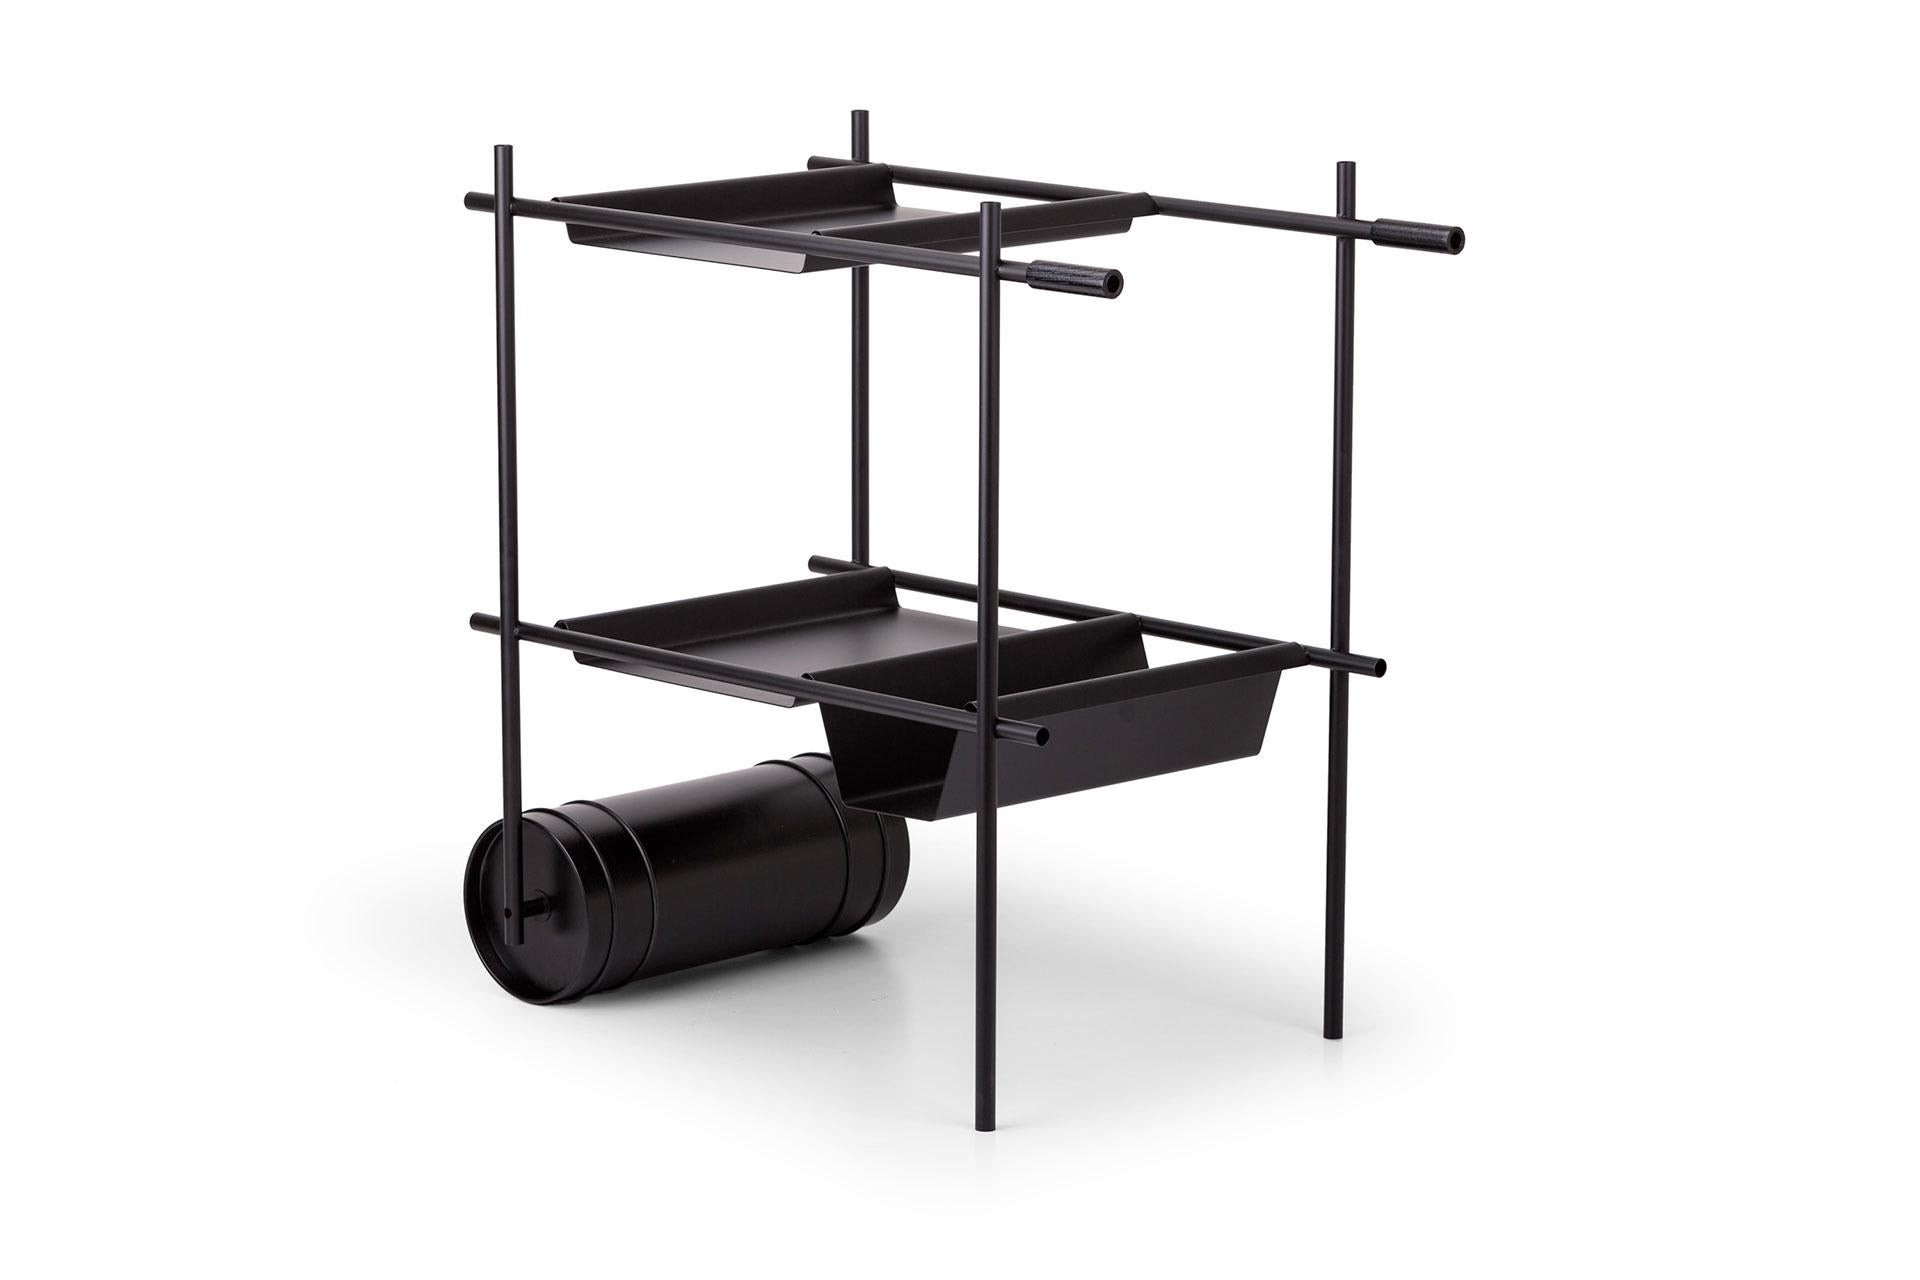 Rollingin Drink Trolley by Mingardo
Dimensions: D86 x W54 x H82 cm 
Materials: Ral 9005 black varnished iron structure and black/ red varnished
aluminium wheel
Weight: 20 kg
Also Available in different finishes. 

Rollingin is a cart for